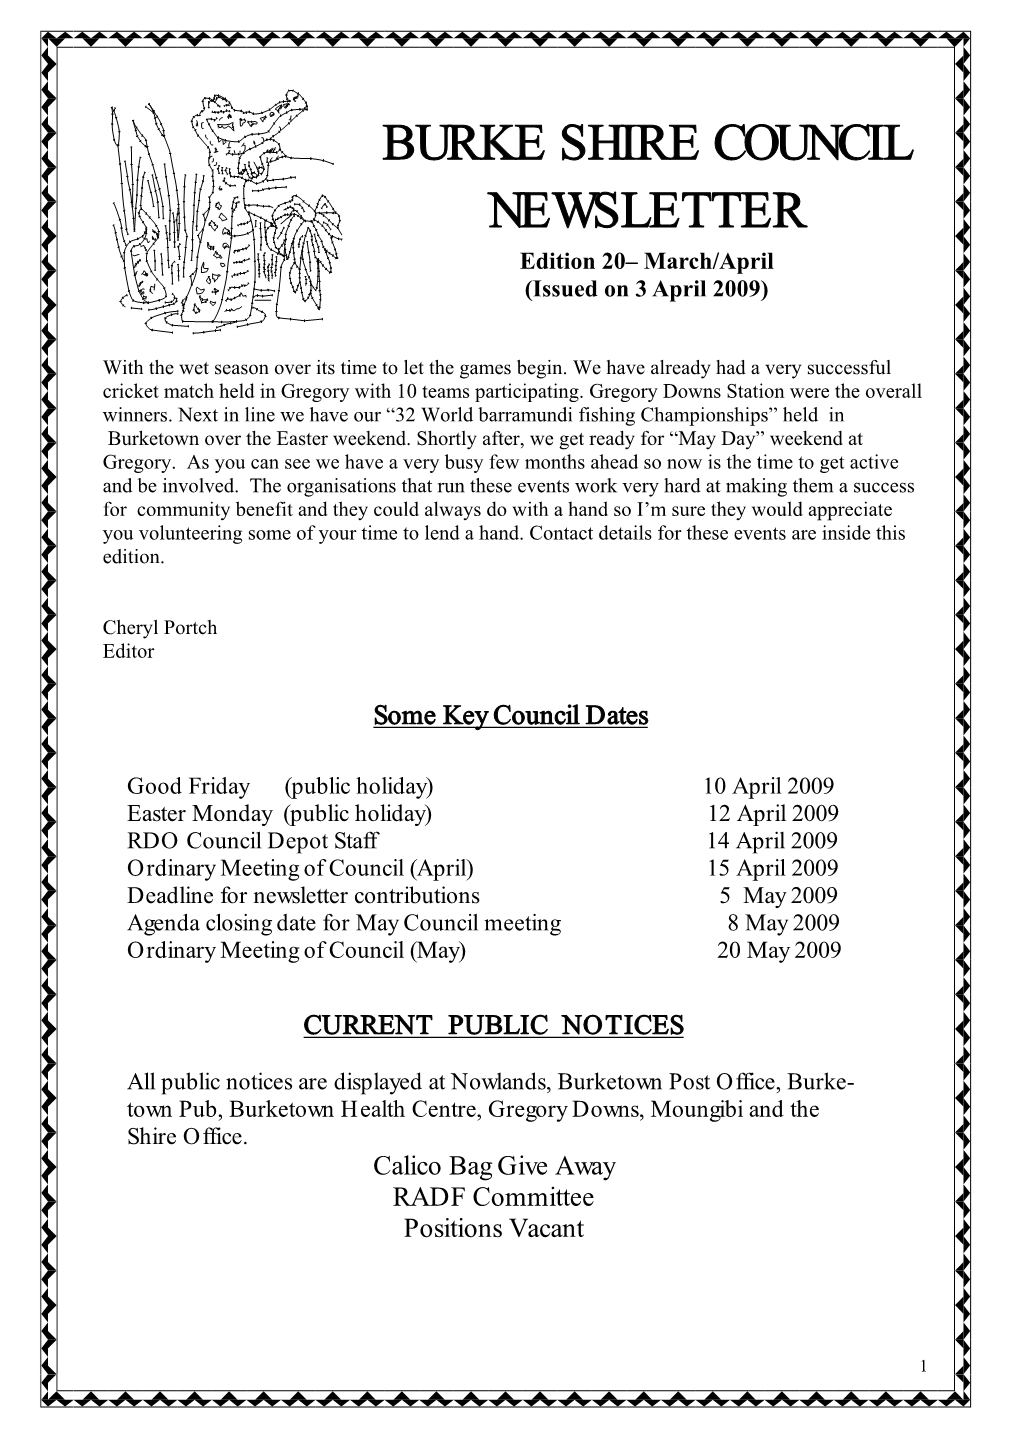 Burke Shire Council Newsletter